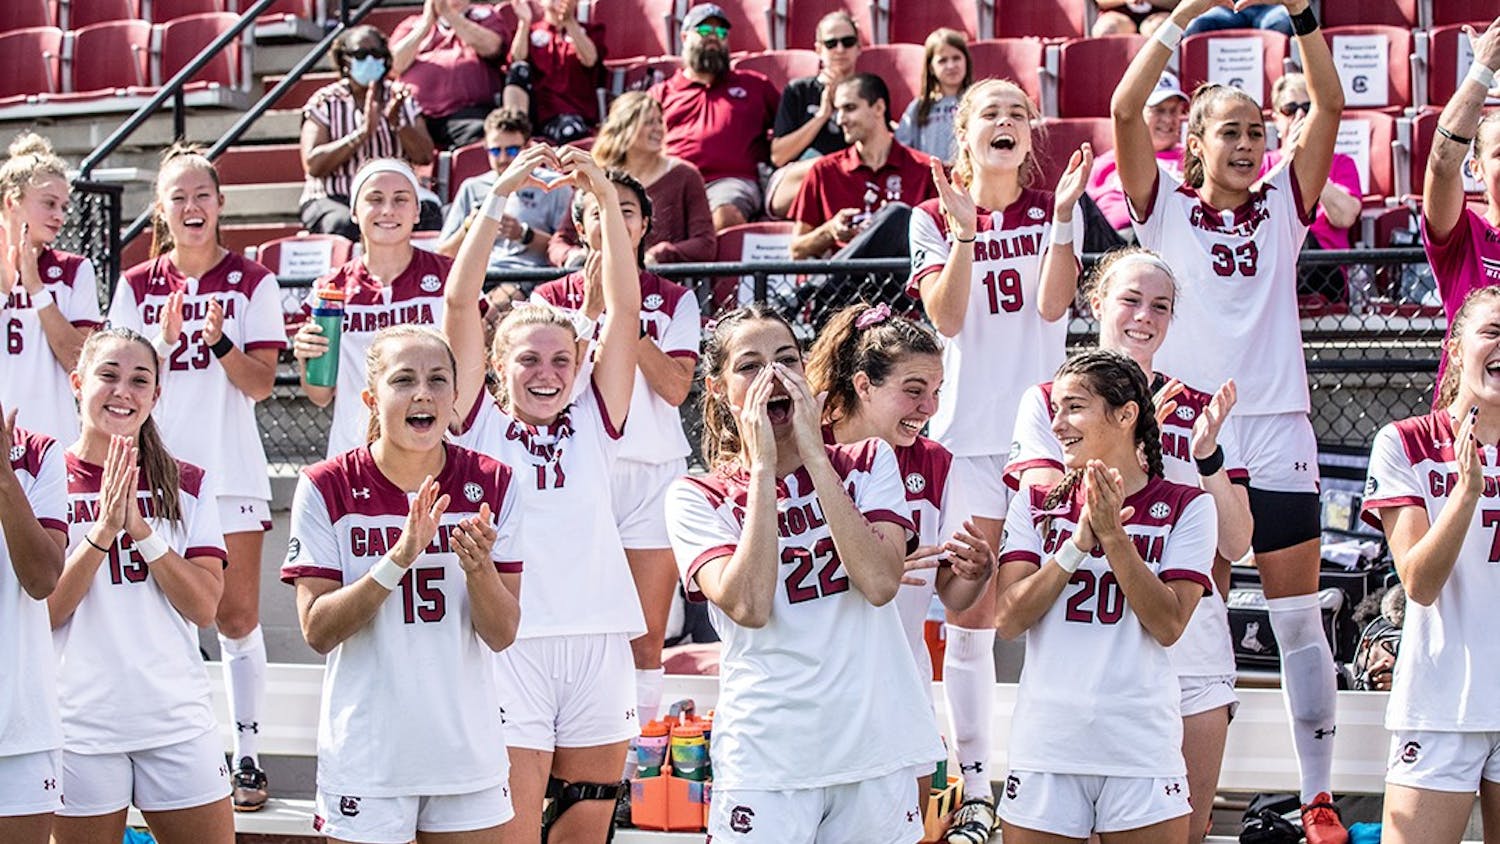 Graduate forward Ryan Gareis, and her teammates cheer at the game versus the Alabama team. The Gamecocks defeated Hofstra 3-0 on Friday, Nov. 19, which advances them to the Round of 16 of the NCAA Tournament.